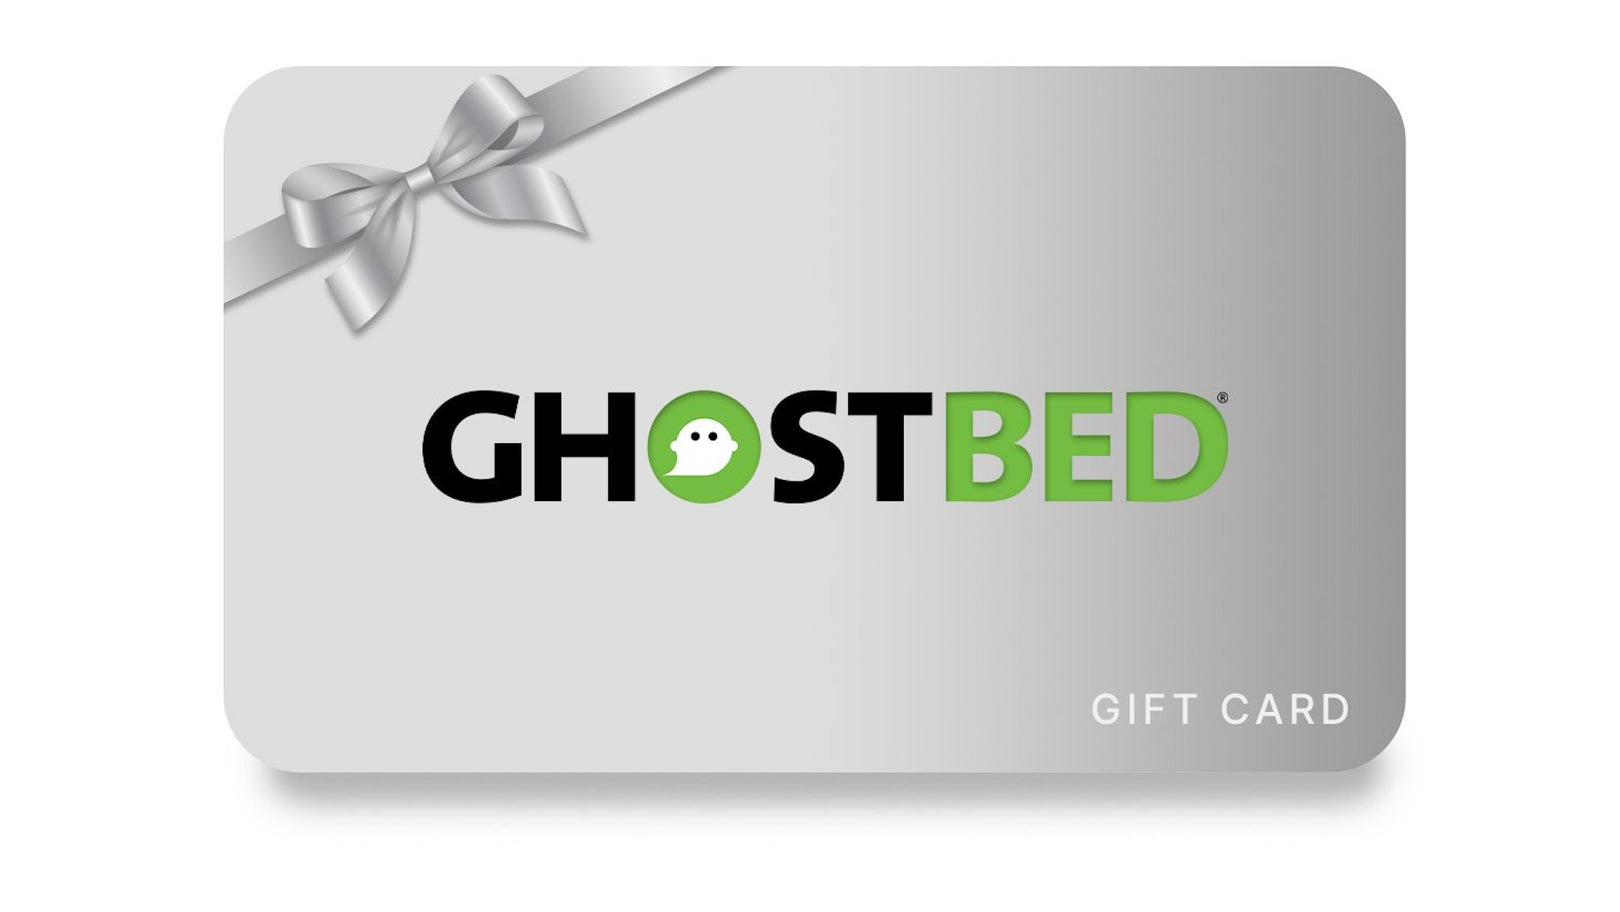 GhostBed Gift Card